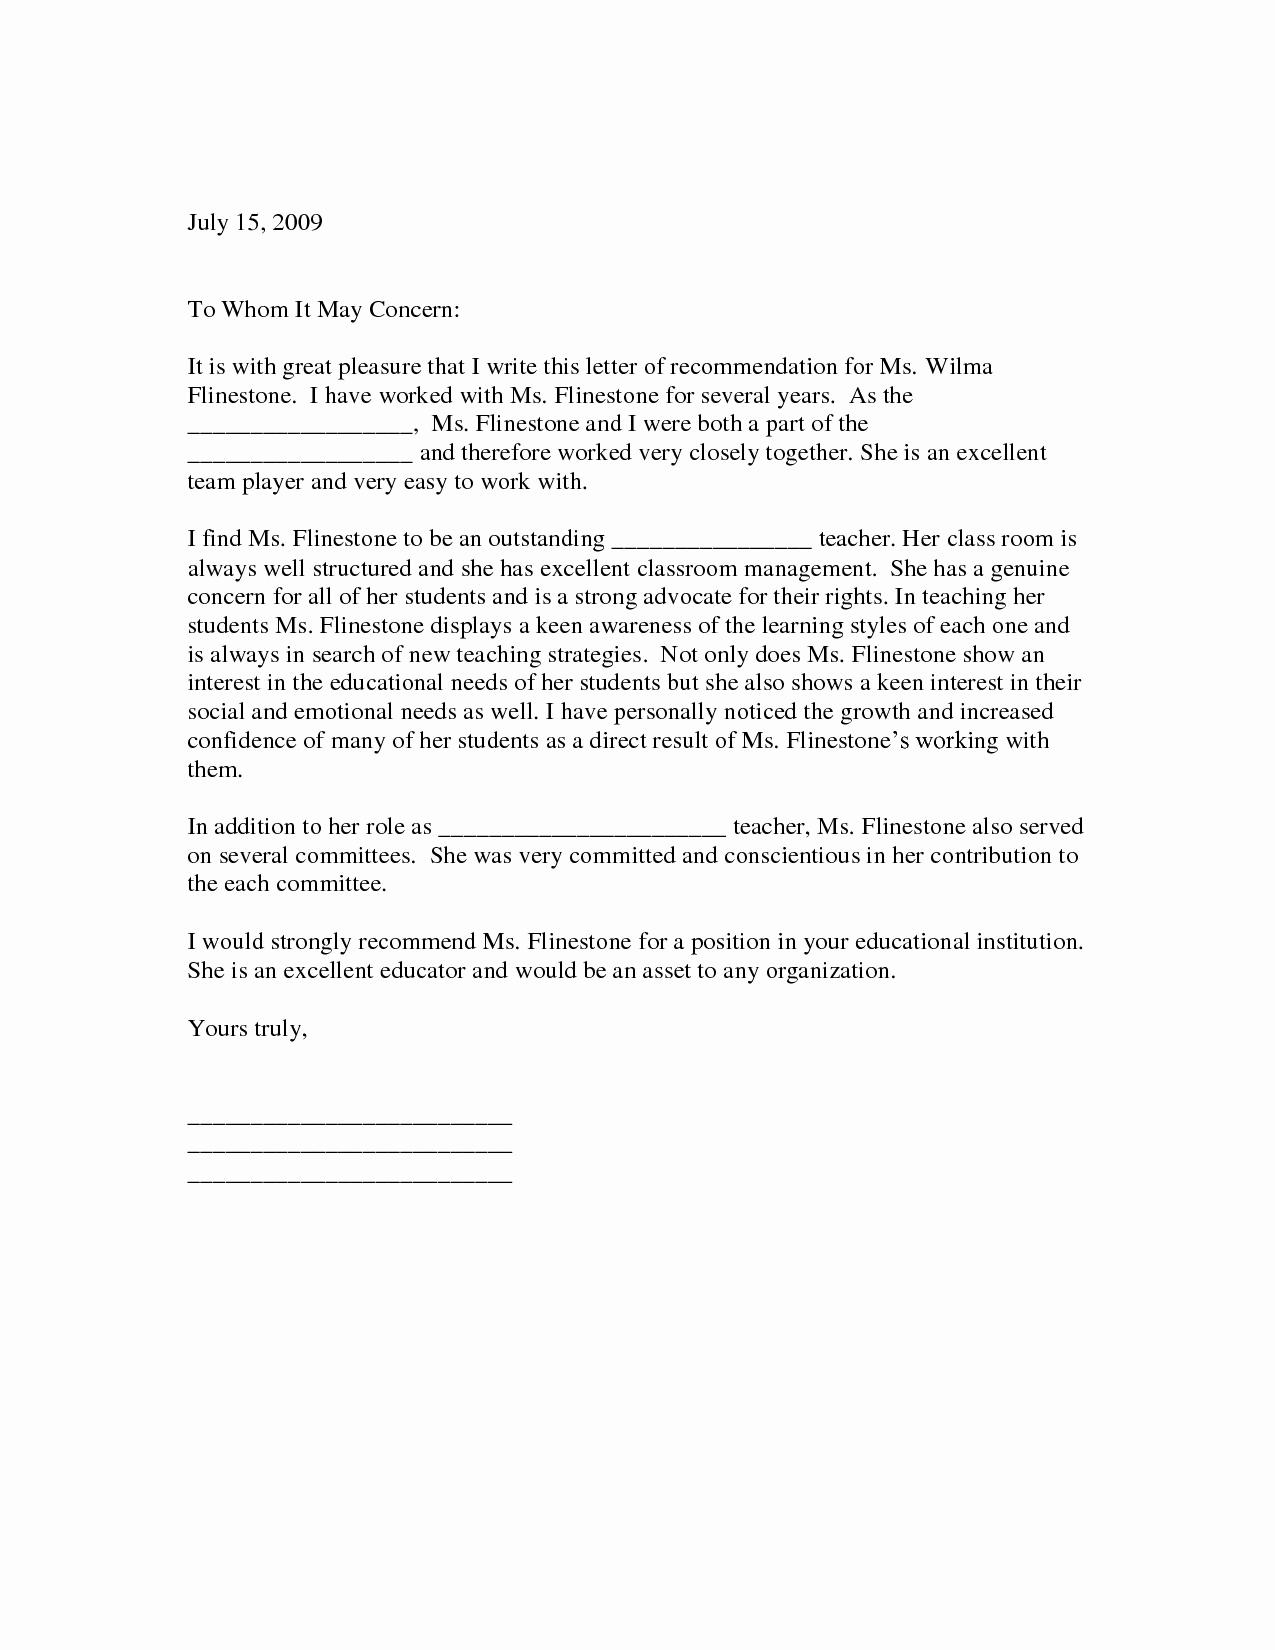 Letter Of Reference for Teachers Inspirational Sample Letter Of Re Mendation for Teacher